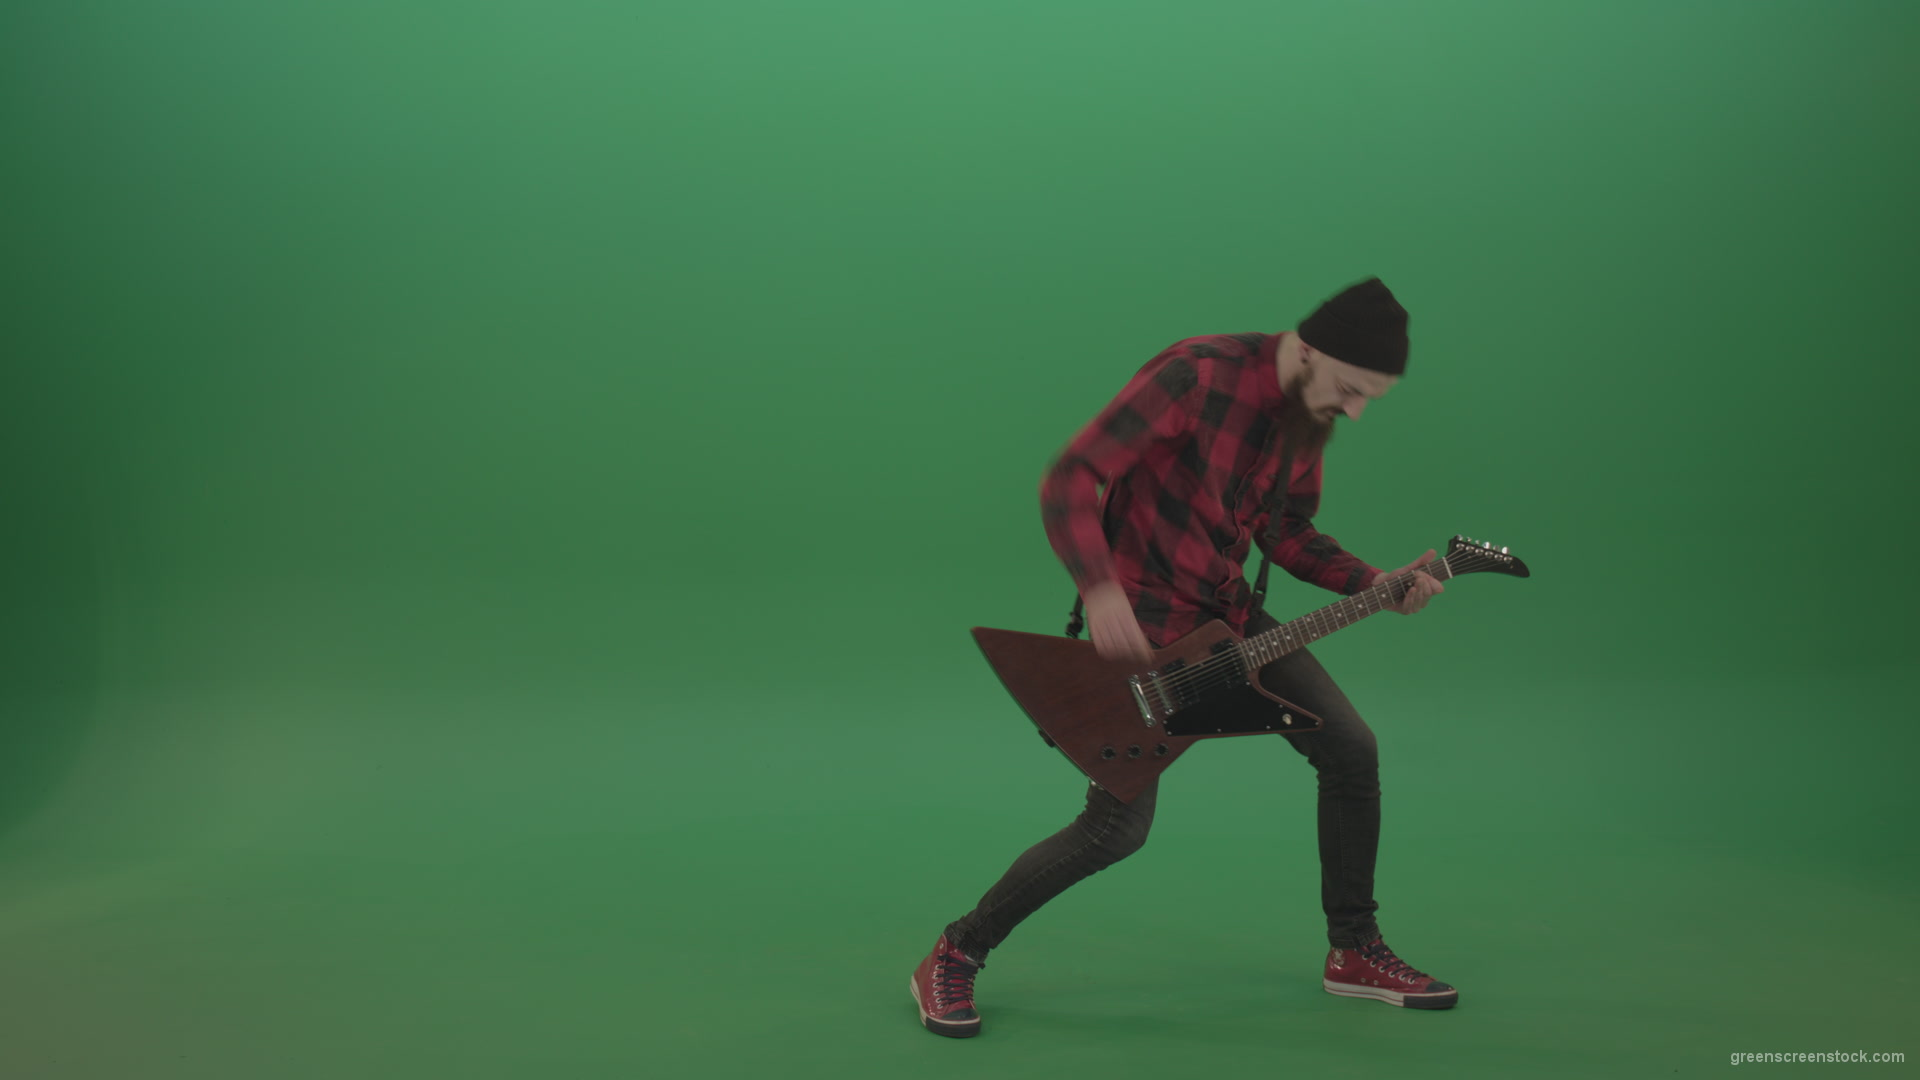 Punk-rock-full-size-man-guitarist-play-guitar-with-emotions-on-green-screen_009 Green Screen Stock